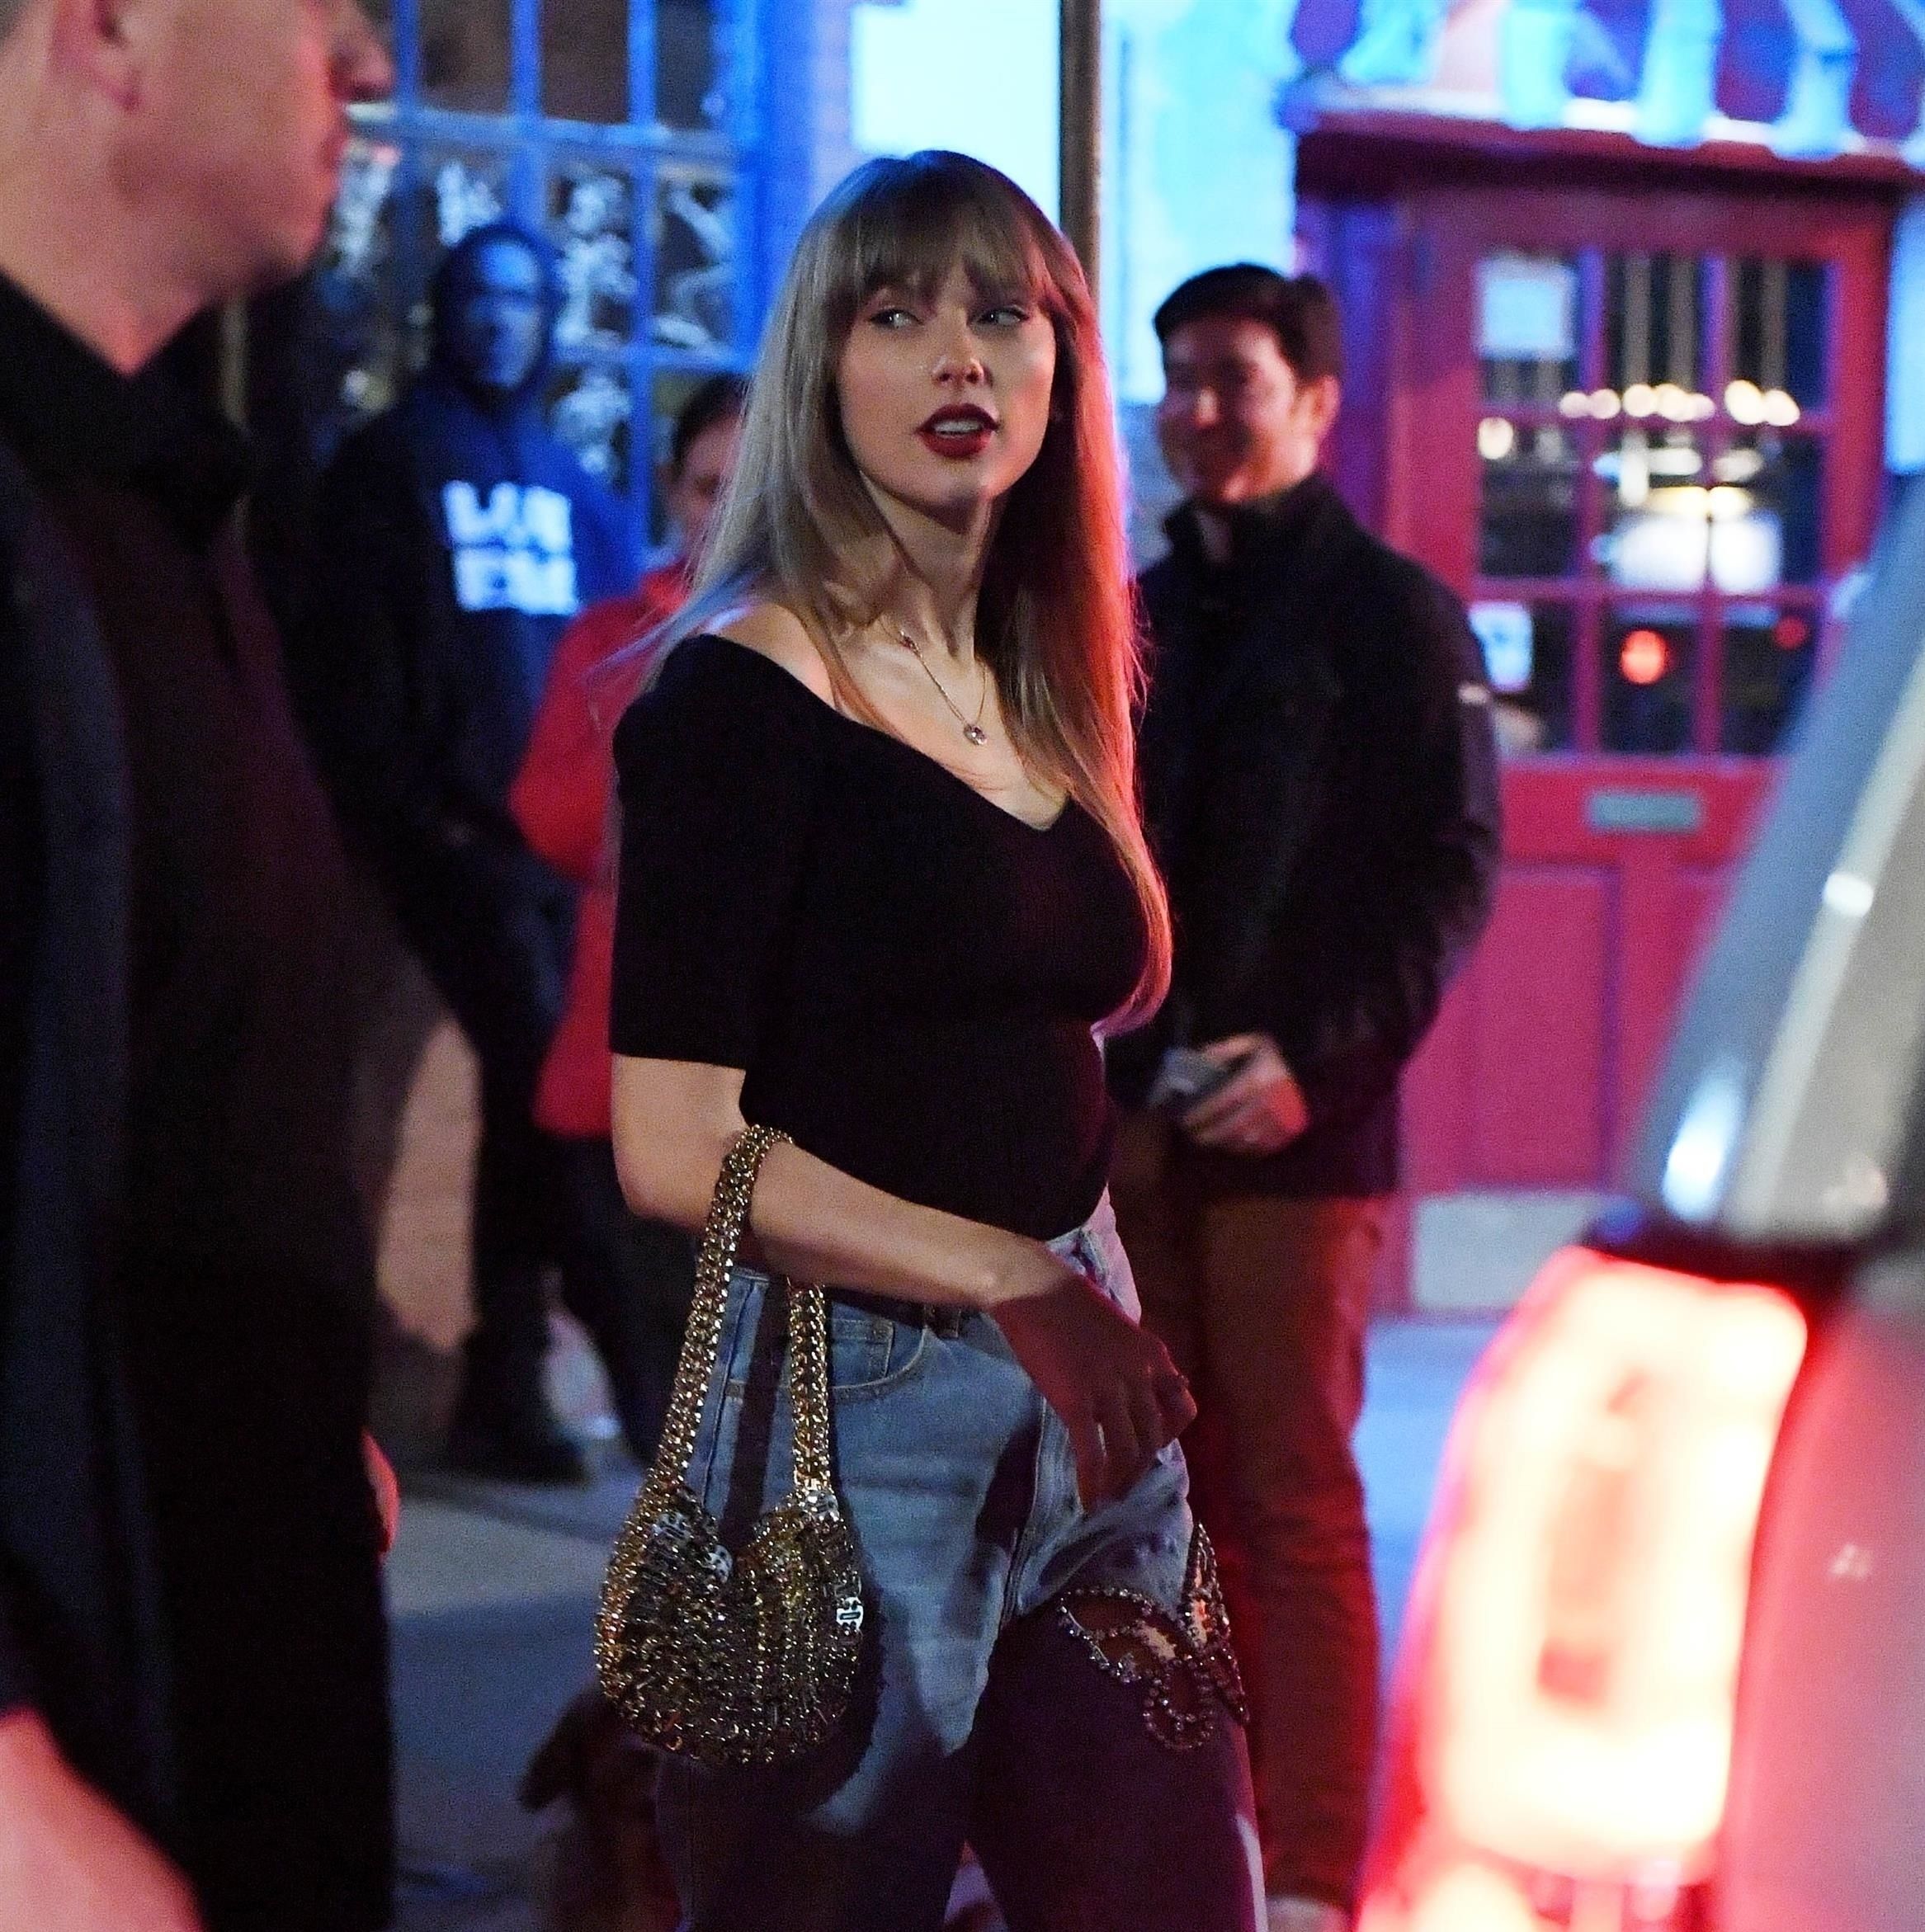 Taylor Swift Was Spotted Grabbing Dinner in NYC and Her Outfit May Have a Subtle Message About 